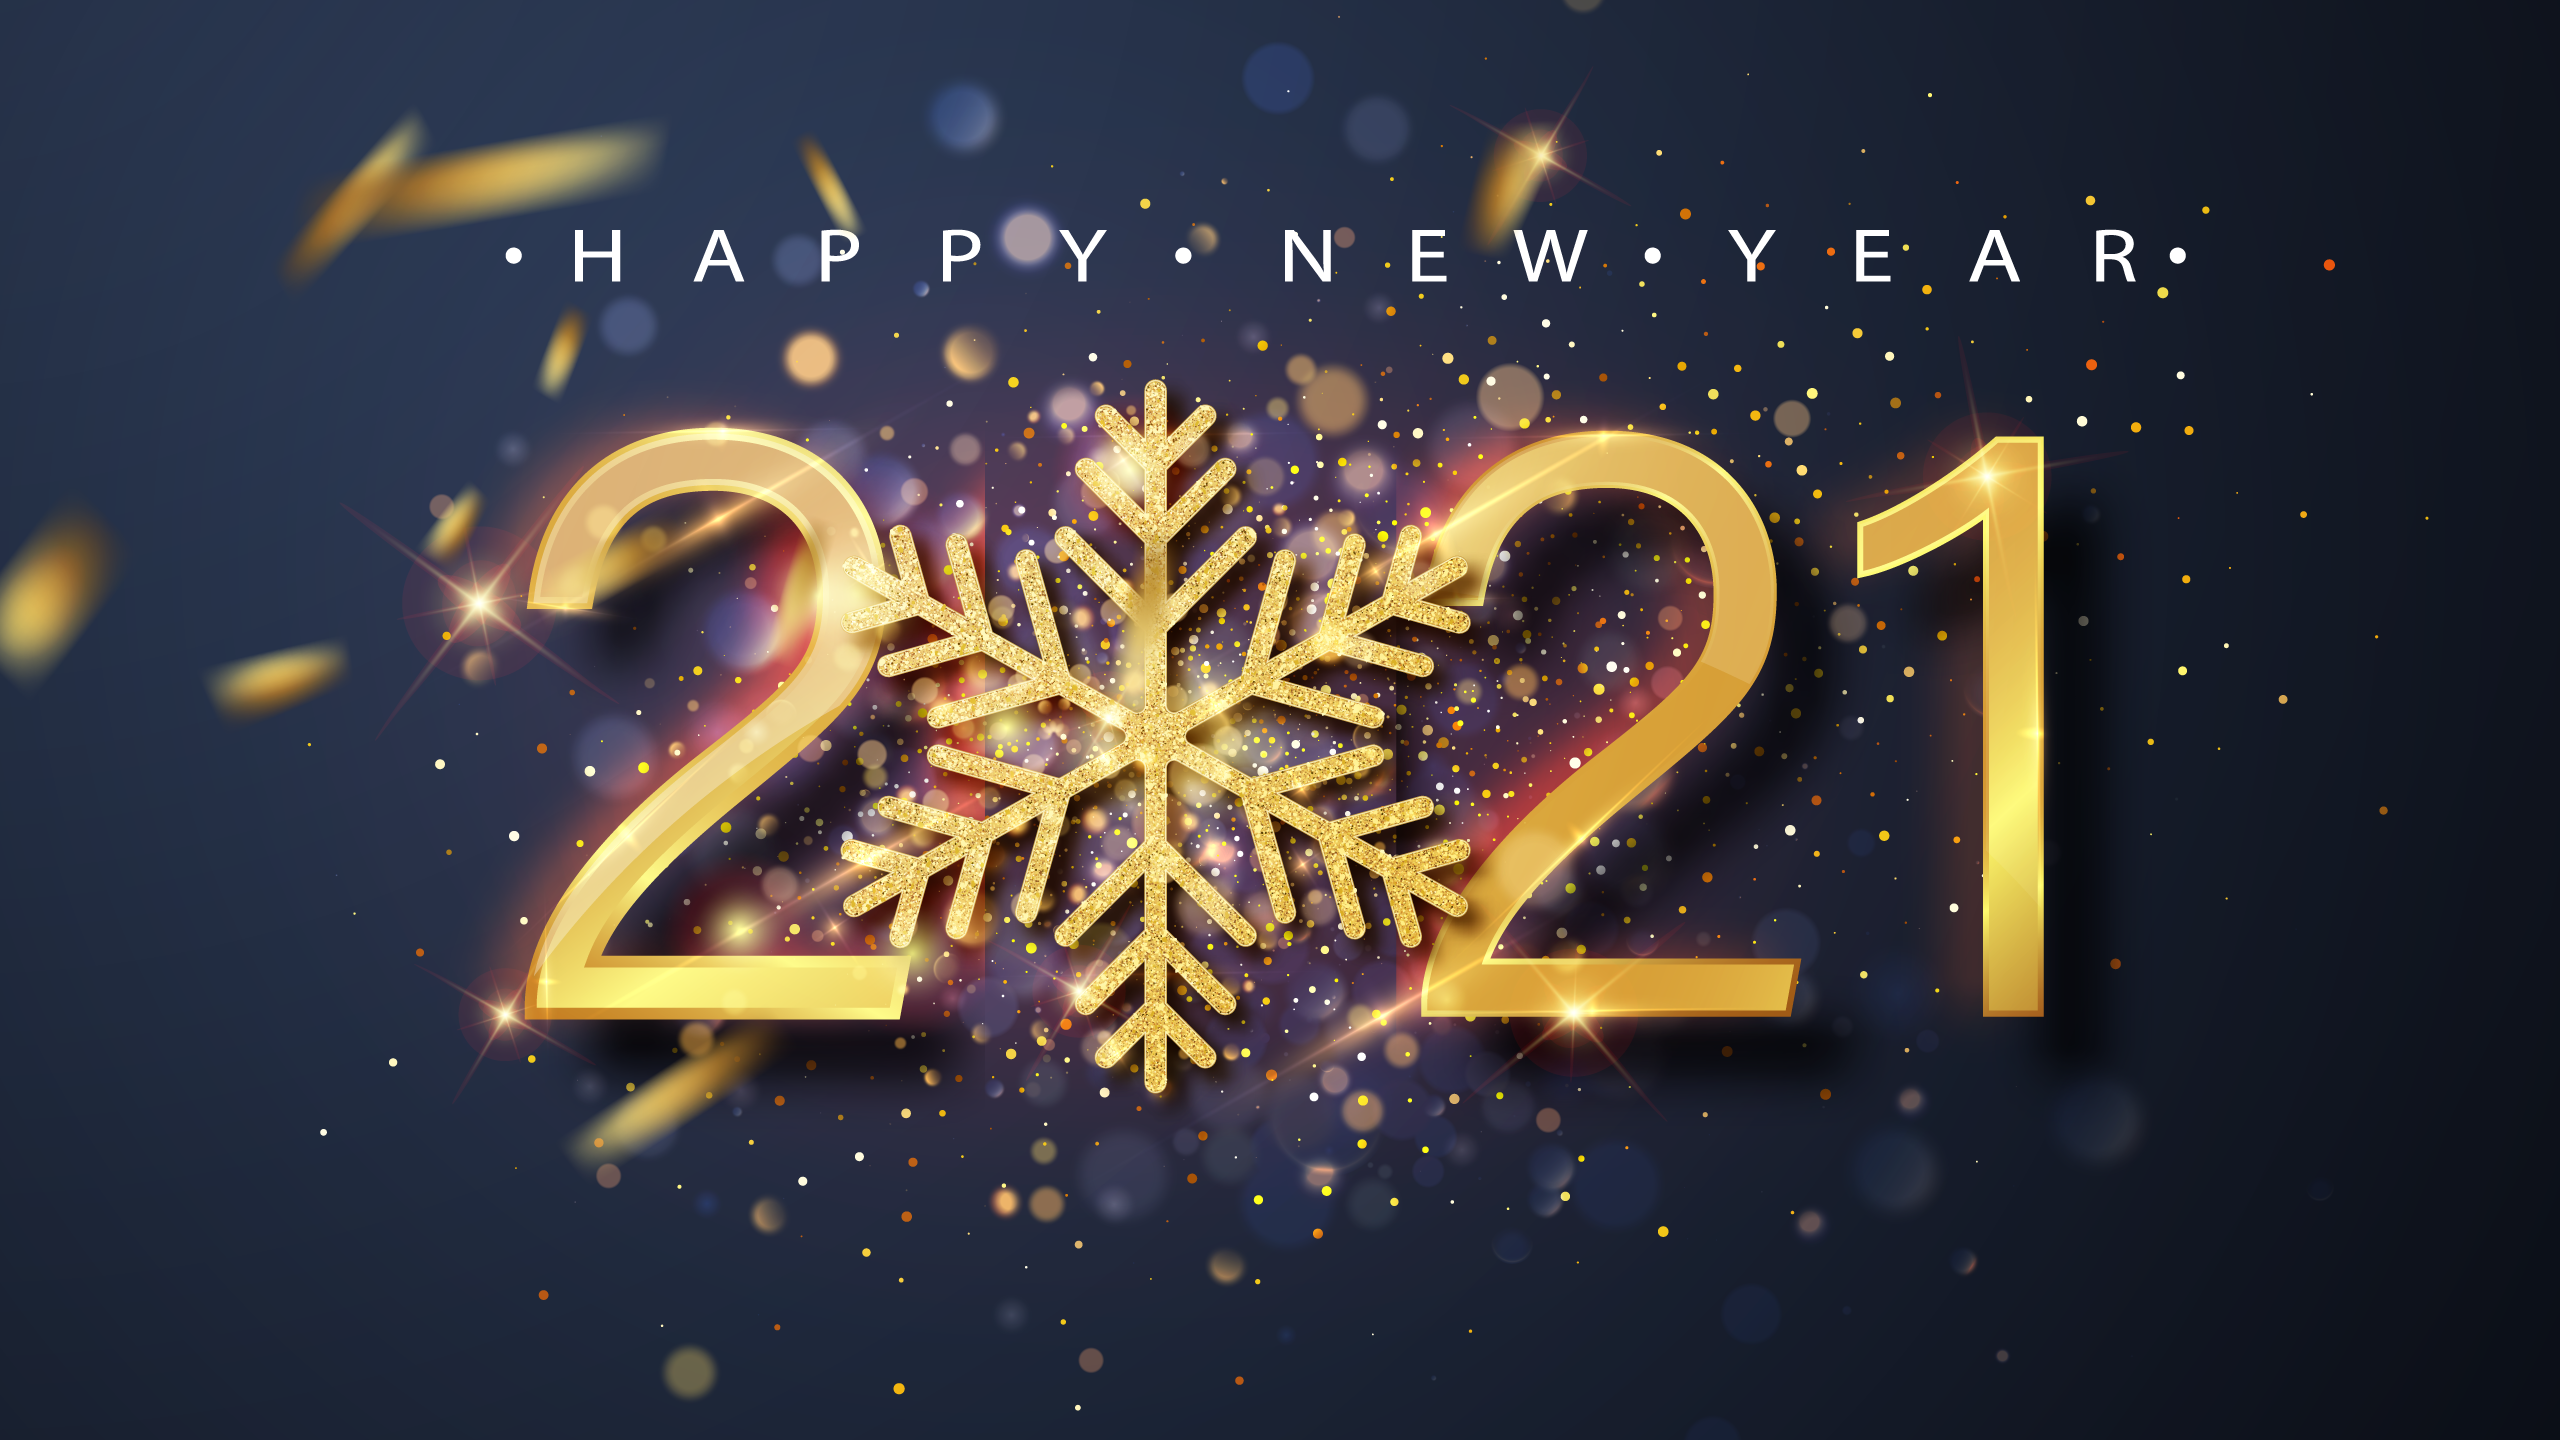 New Year 4K Wallpaper, Happy New Year, Golden Letters, Sparkles, Celebrations New Year